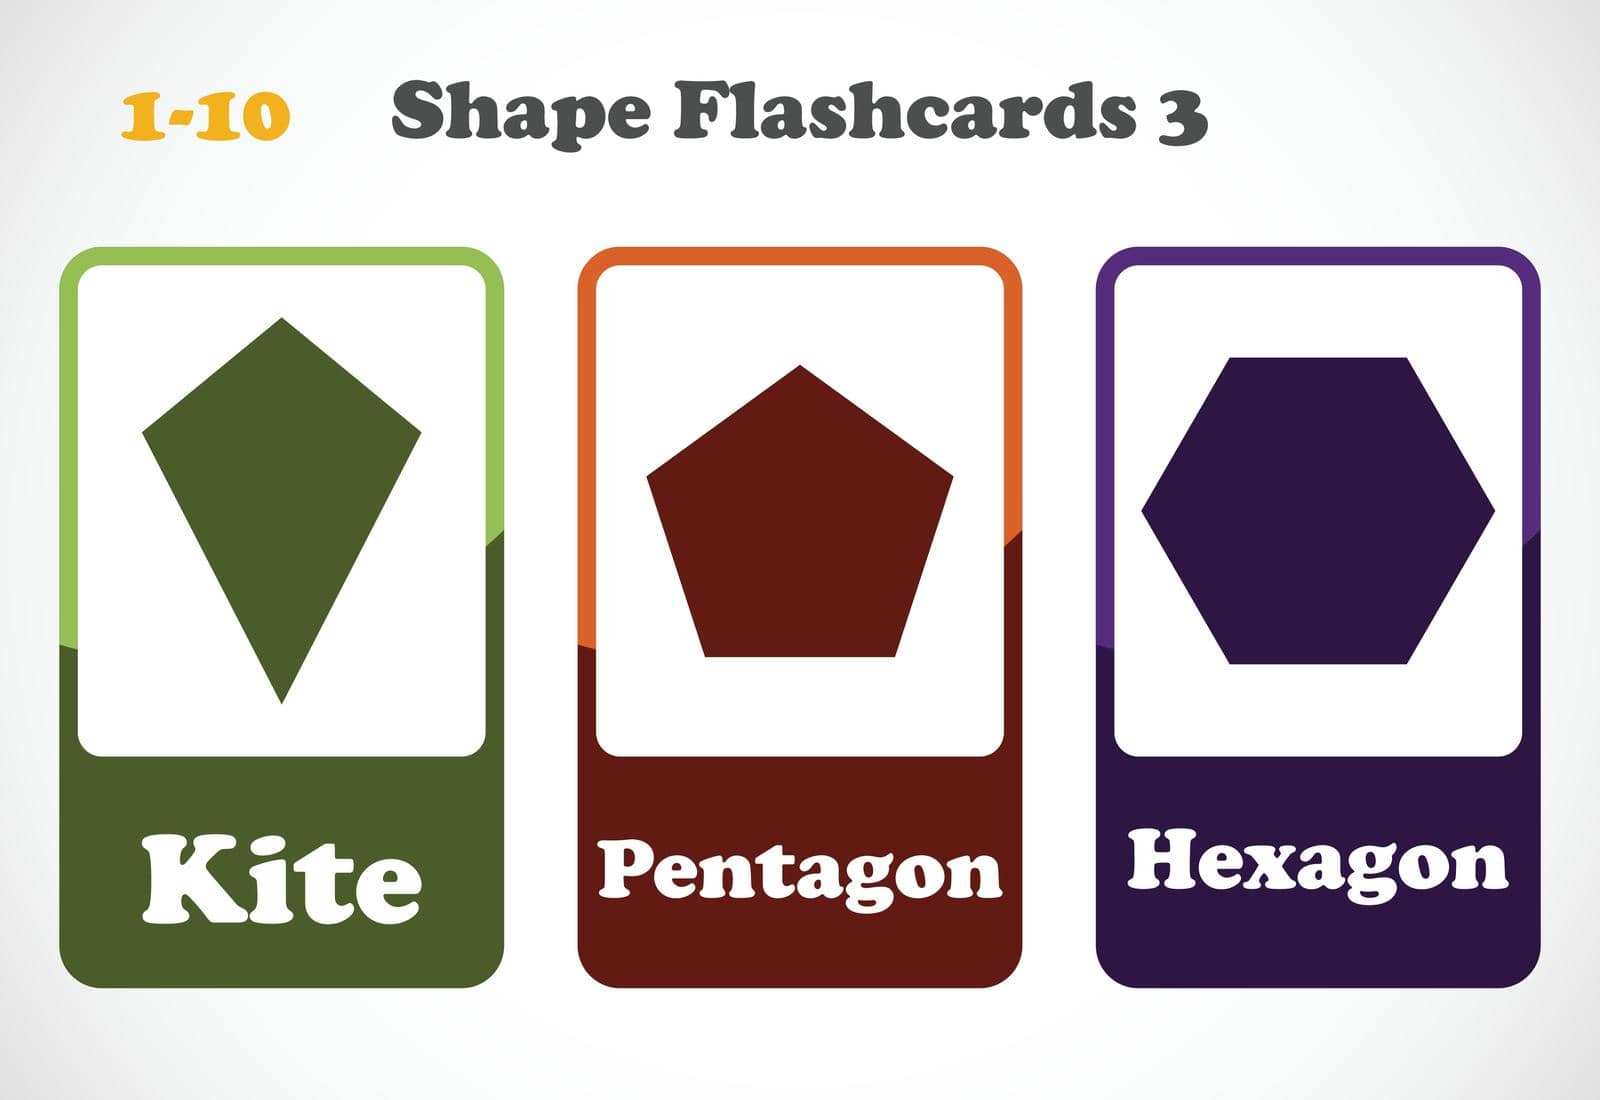 Geometric shapes flashcards for kids. Educational material for children. Learn The Shapes